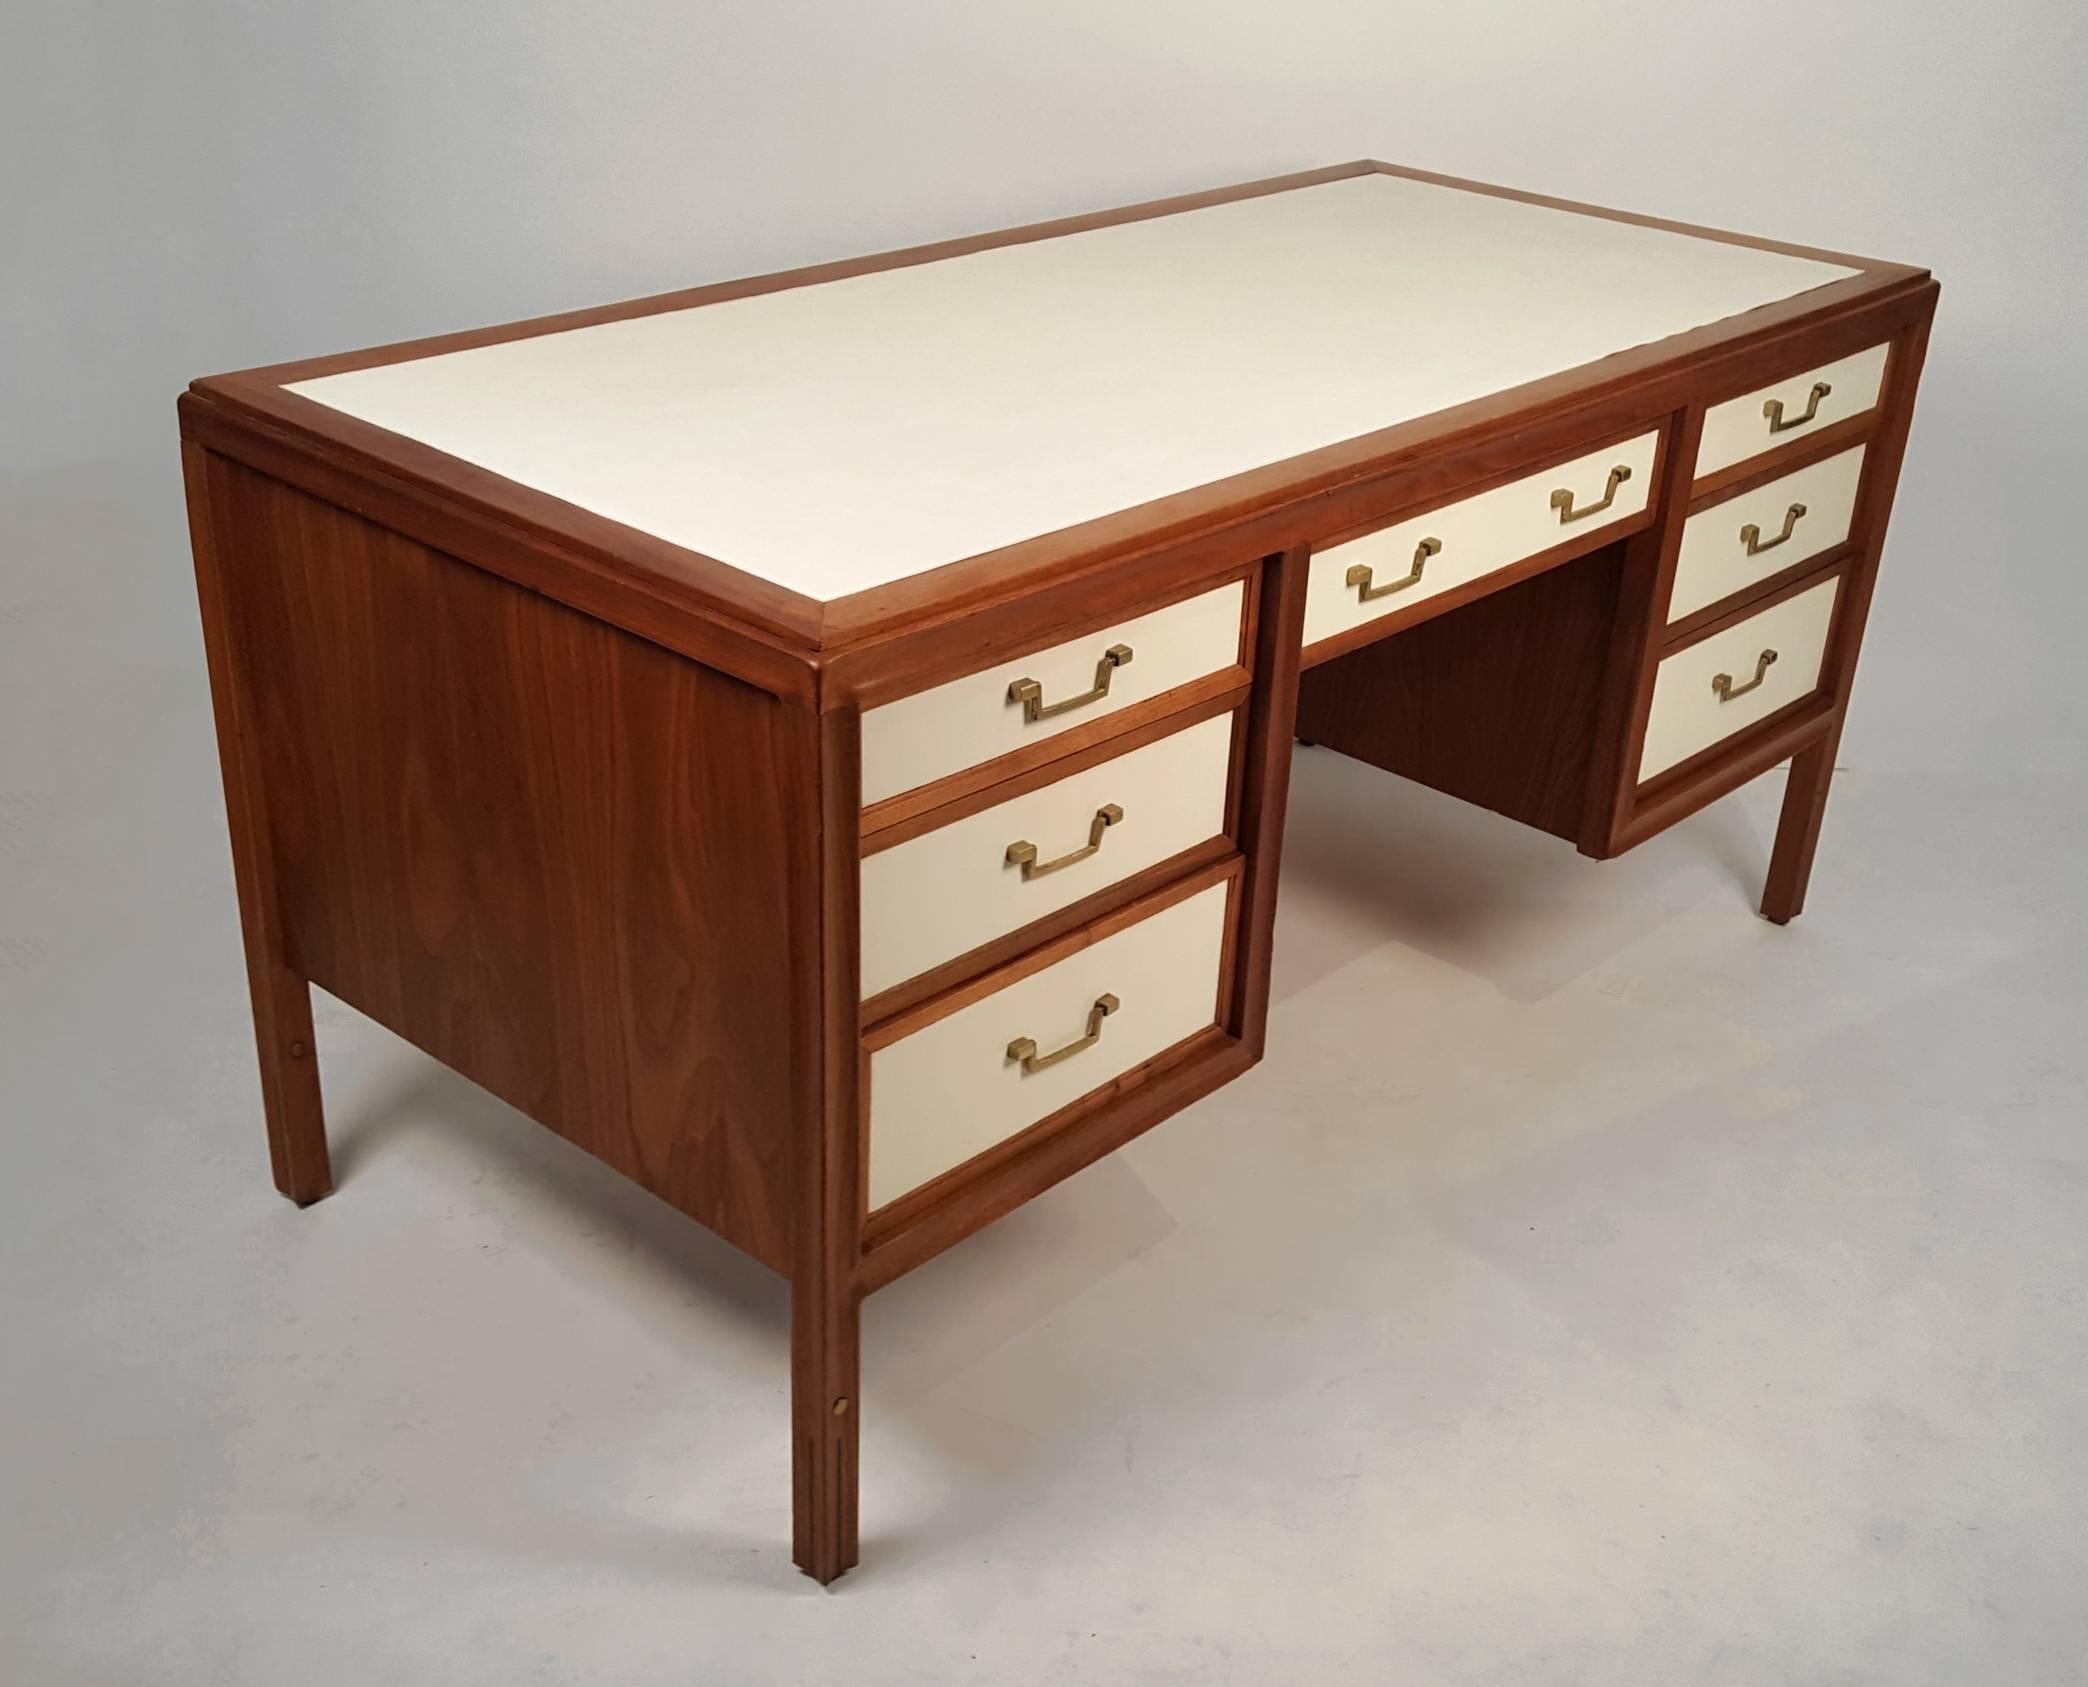 American Walnut Campaign Desk with Leather Top and Drawers by Gerry Zanck